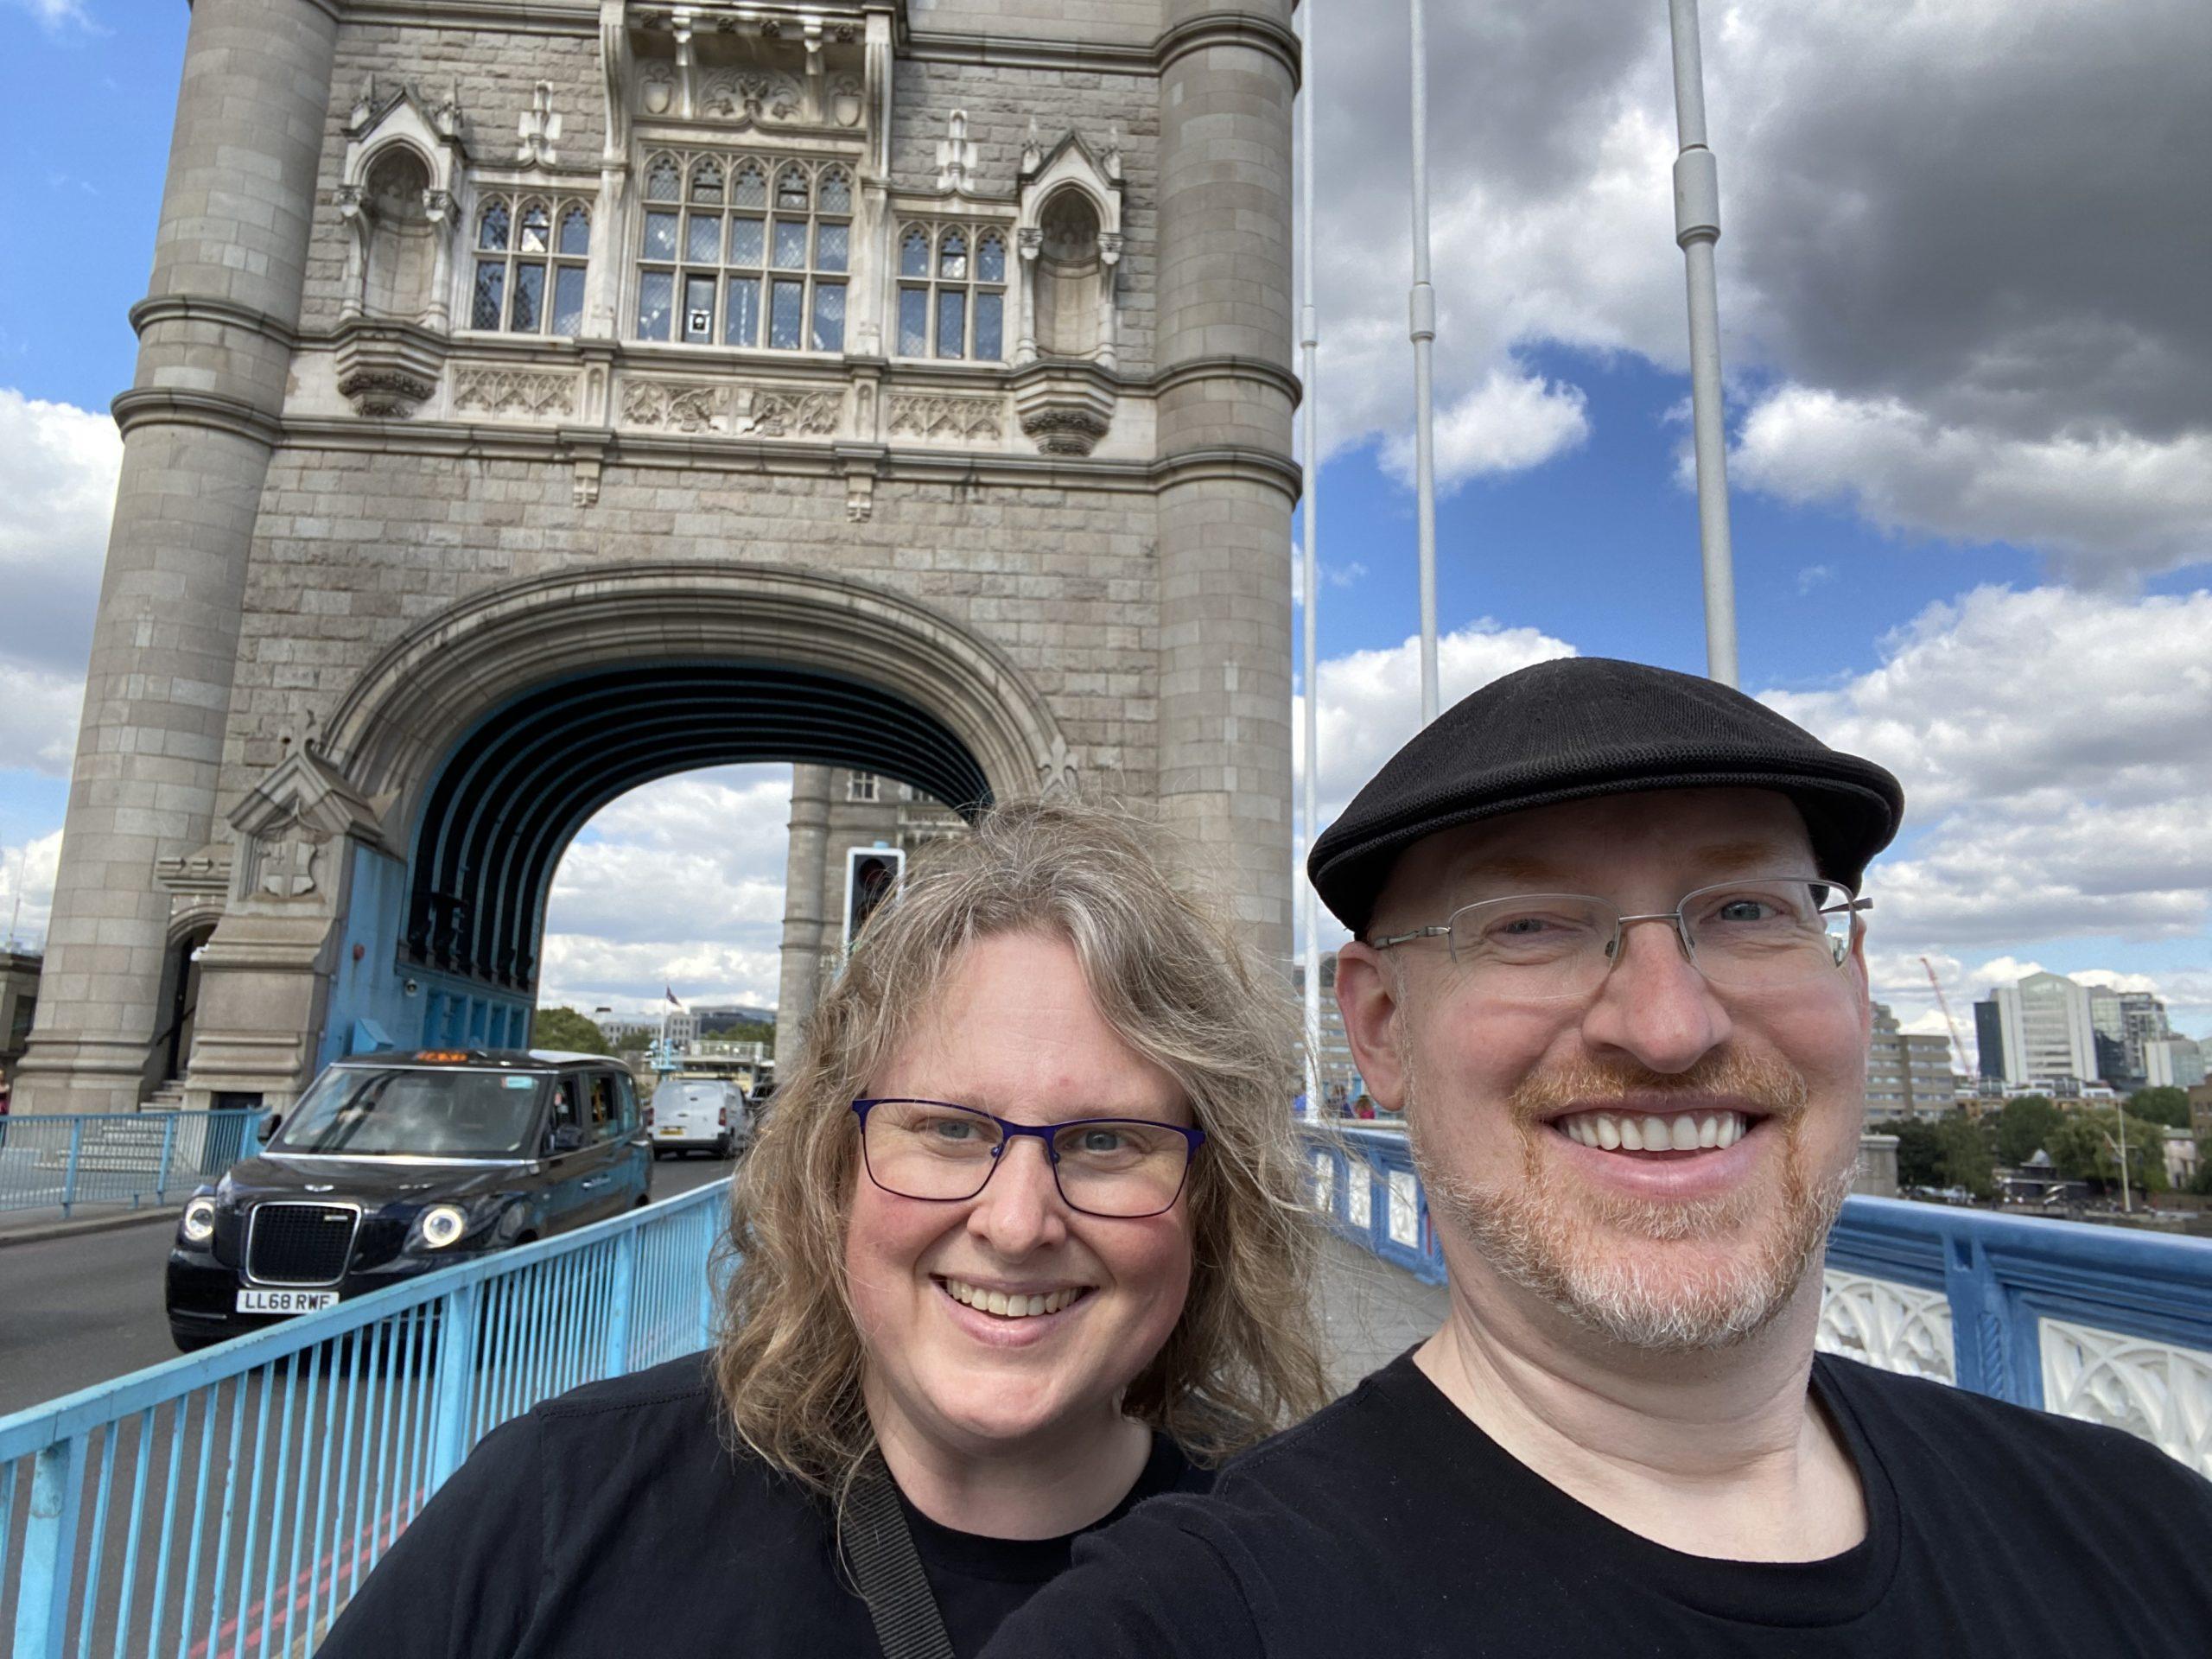 My wife and I midway across Tower Bridge.